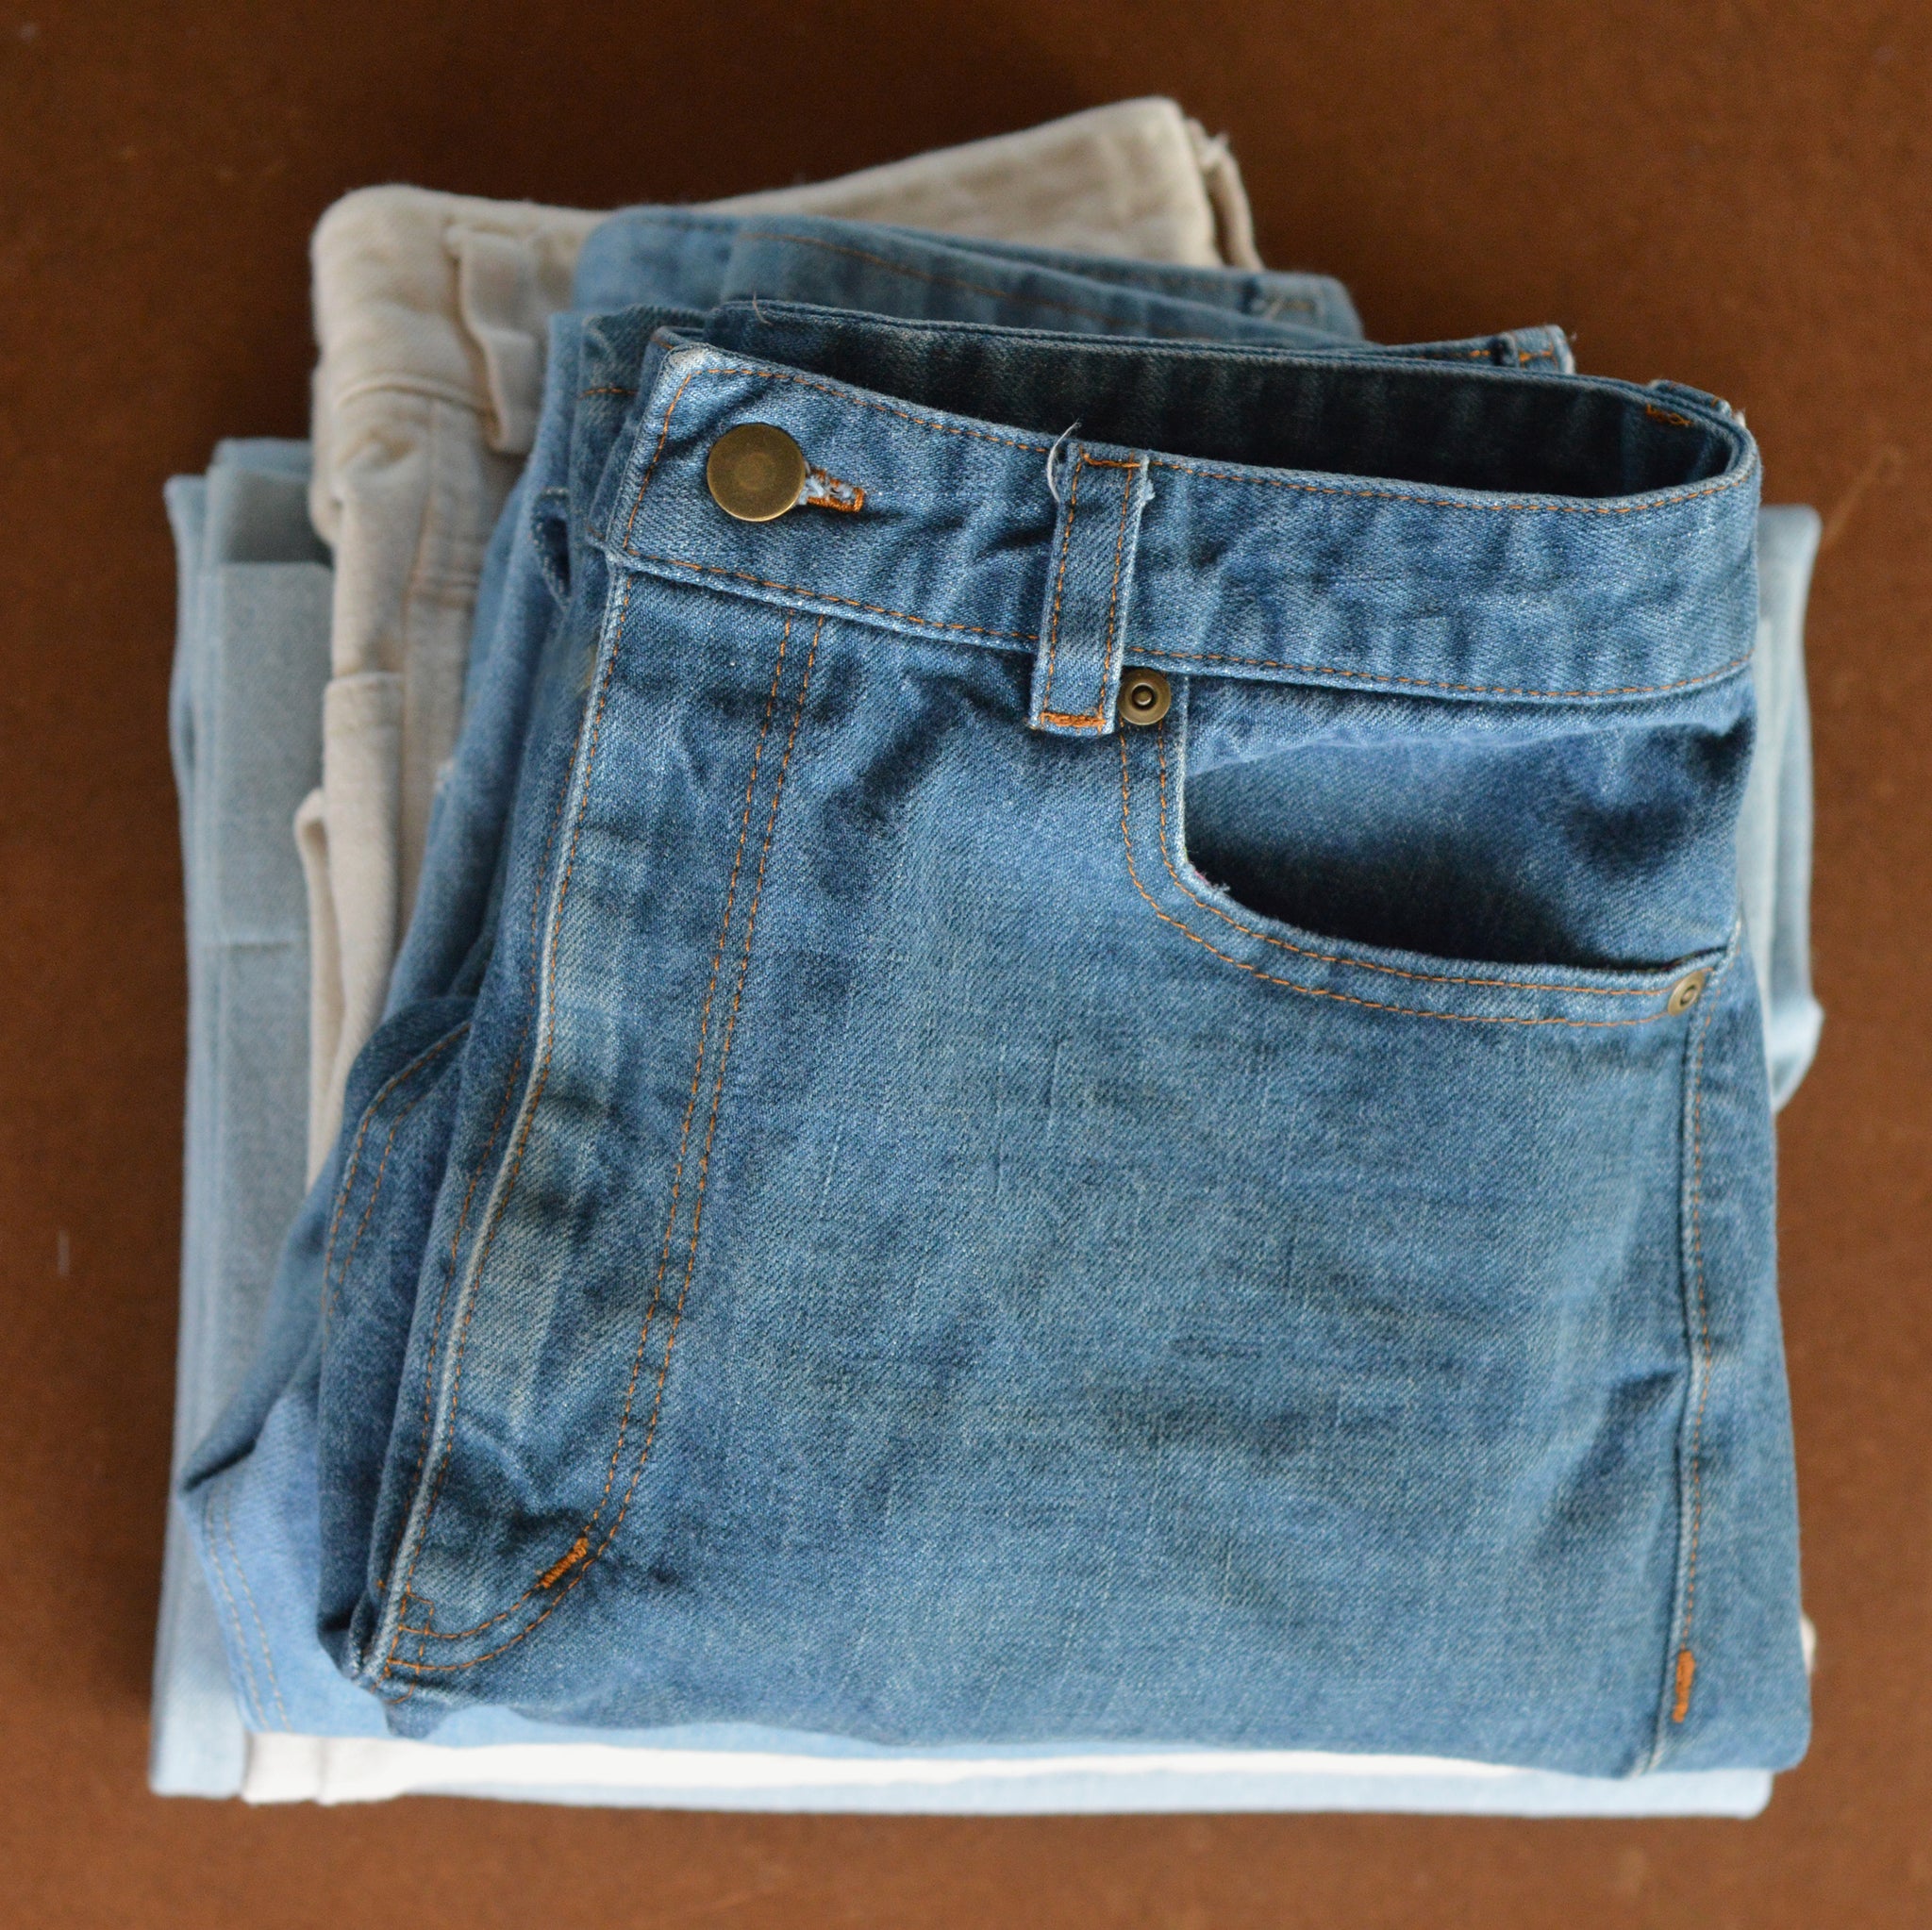 Textiles - Garment Sewing - Make Your Own Jeans